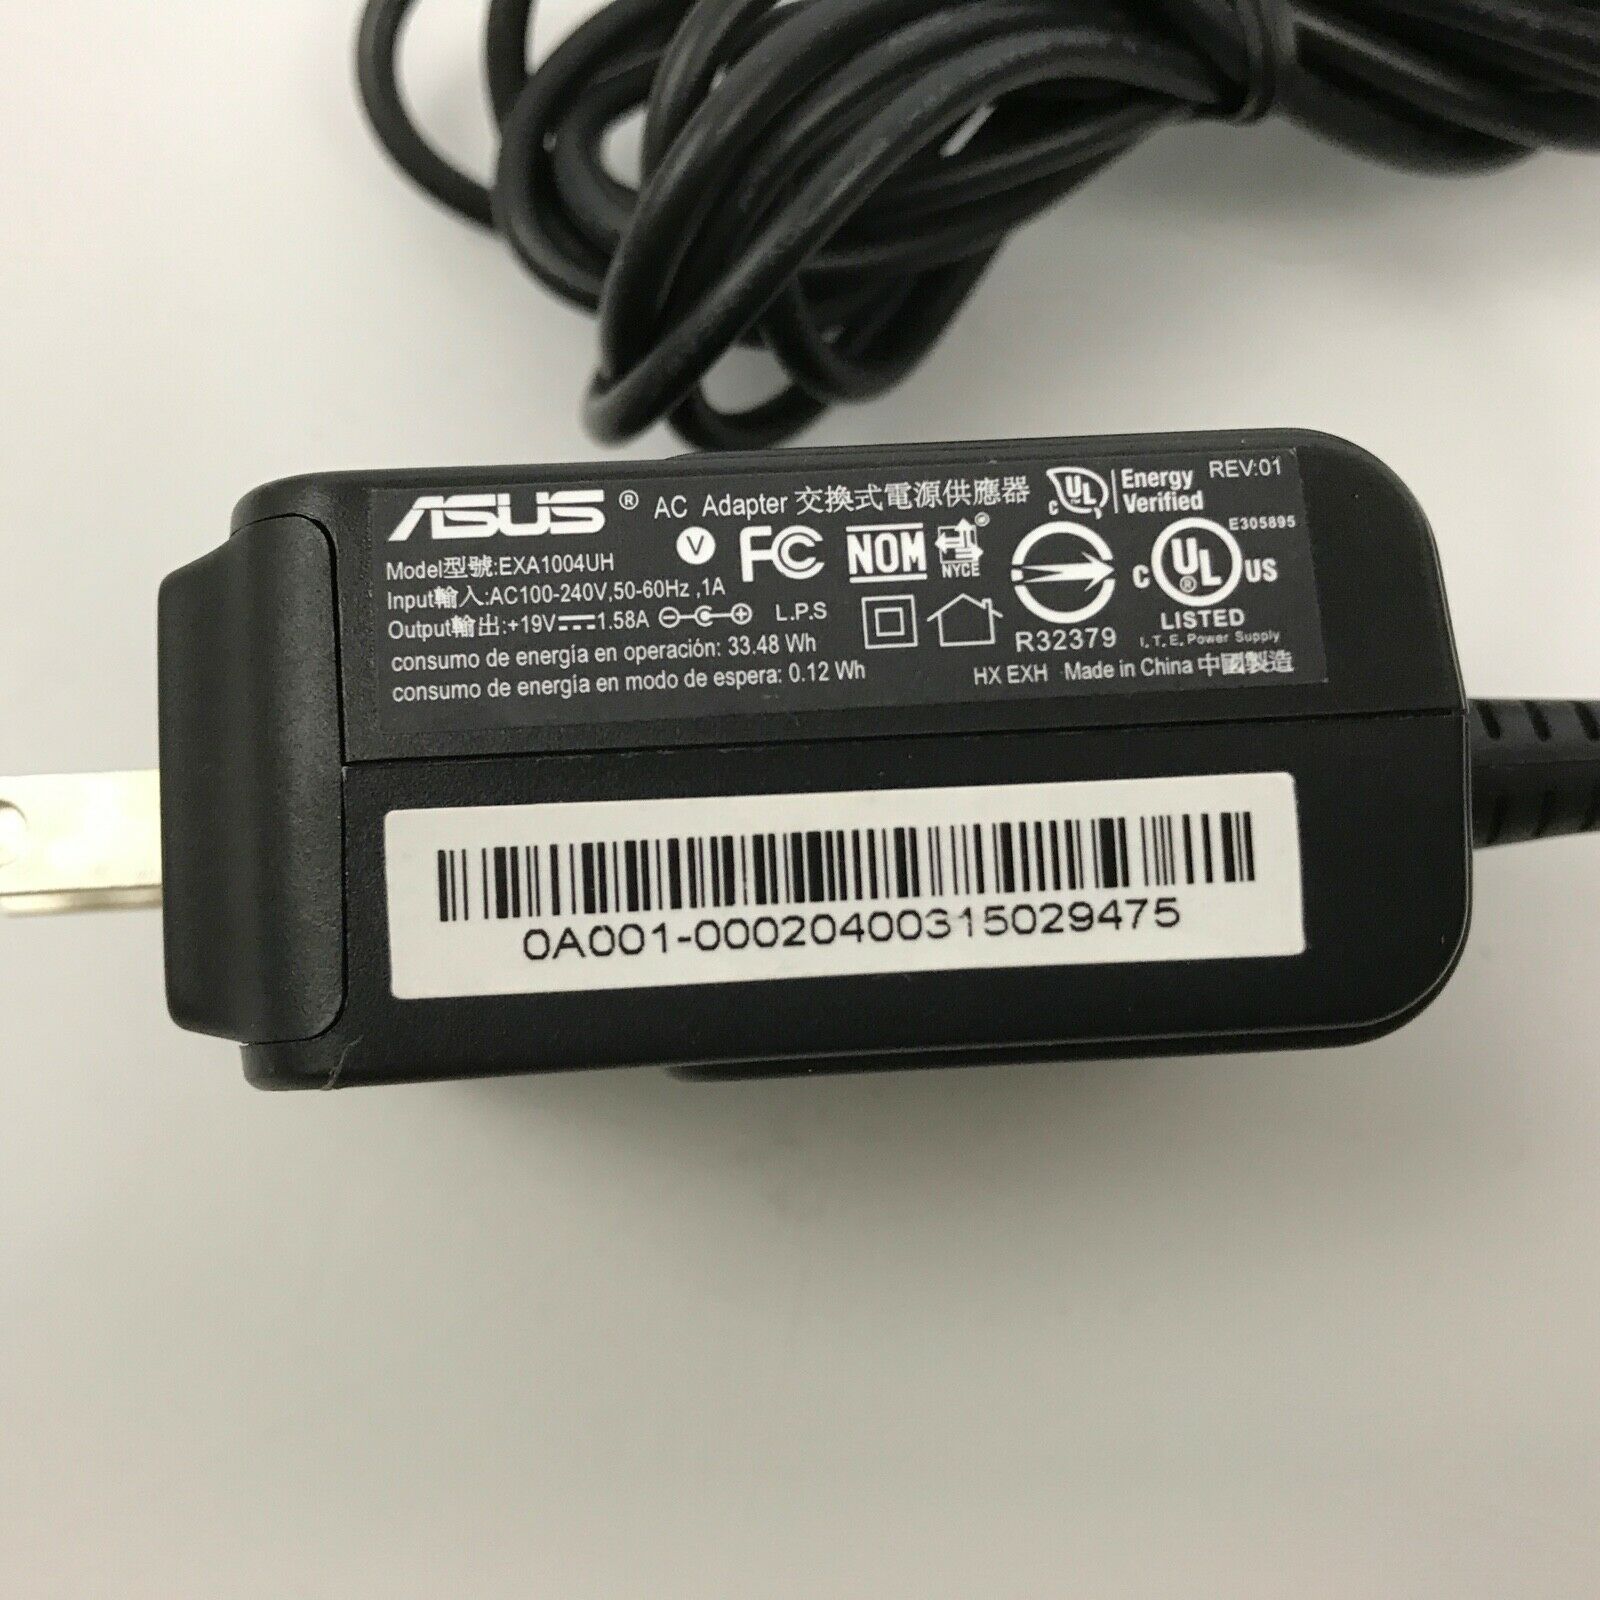 NEW ASUS EXA1004UH 19v 1.58a AC Power Adapter Cable Cord Power Supply